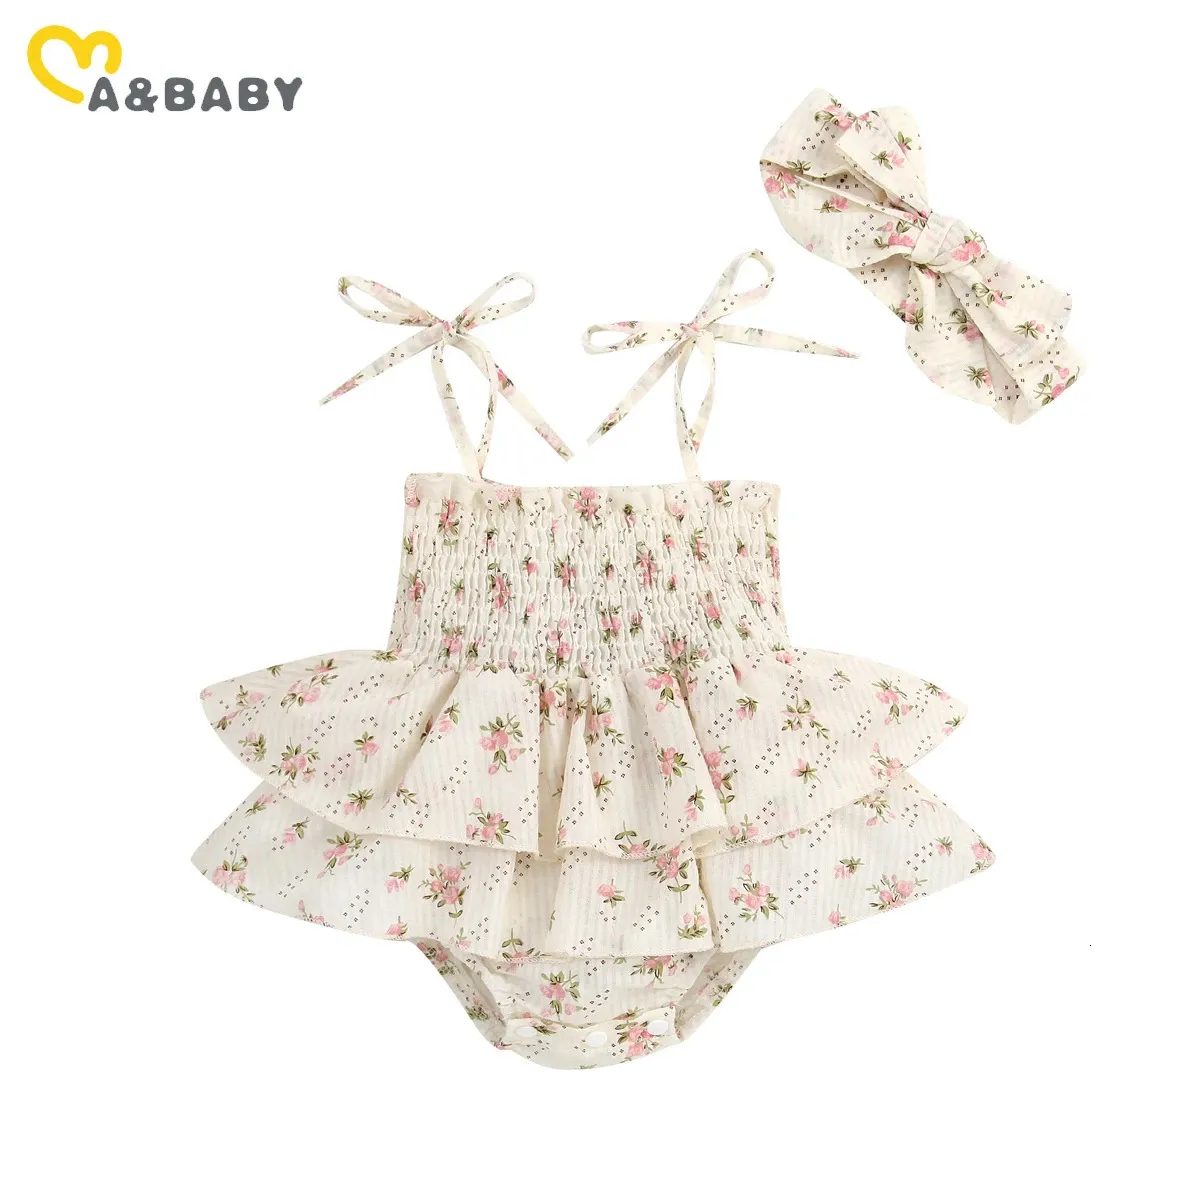 ma baby 024M Baby Girl Romper born Infant Jumpsuit Cute Floral Print Ruffle Sunsuit Headband Outfits Summer Clothing 240408